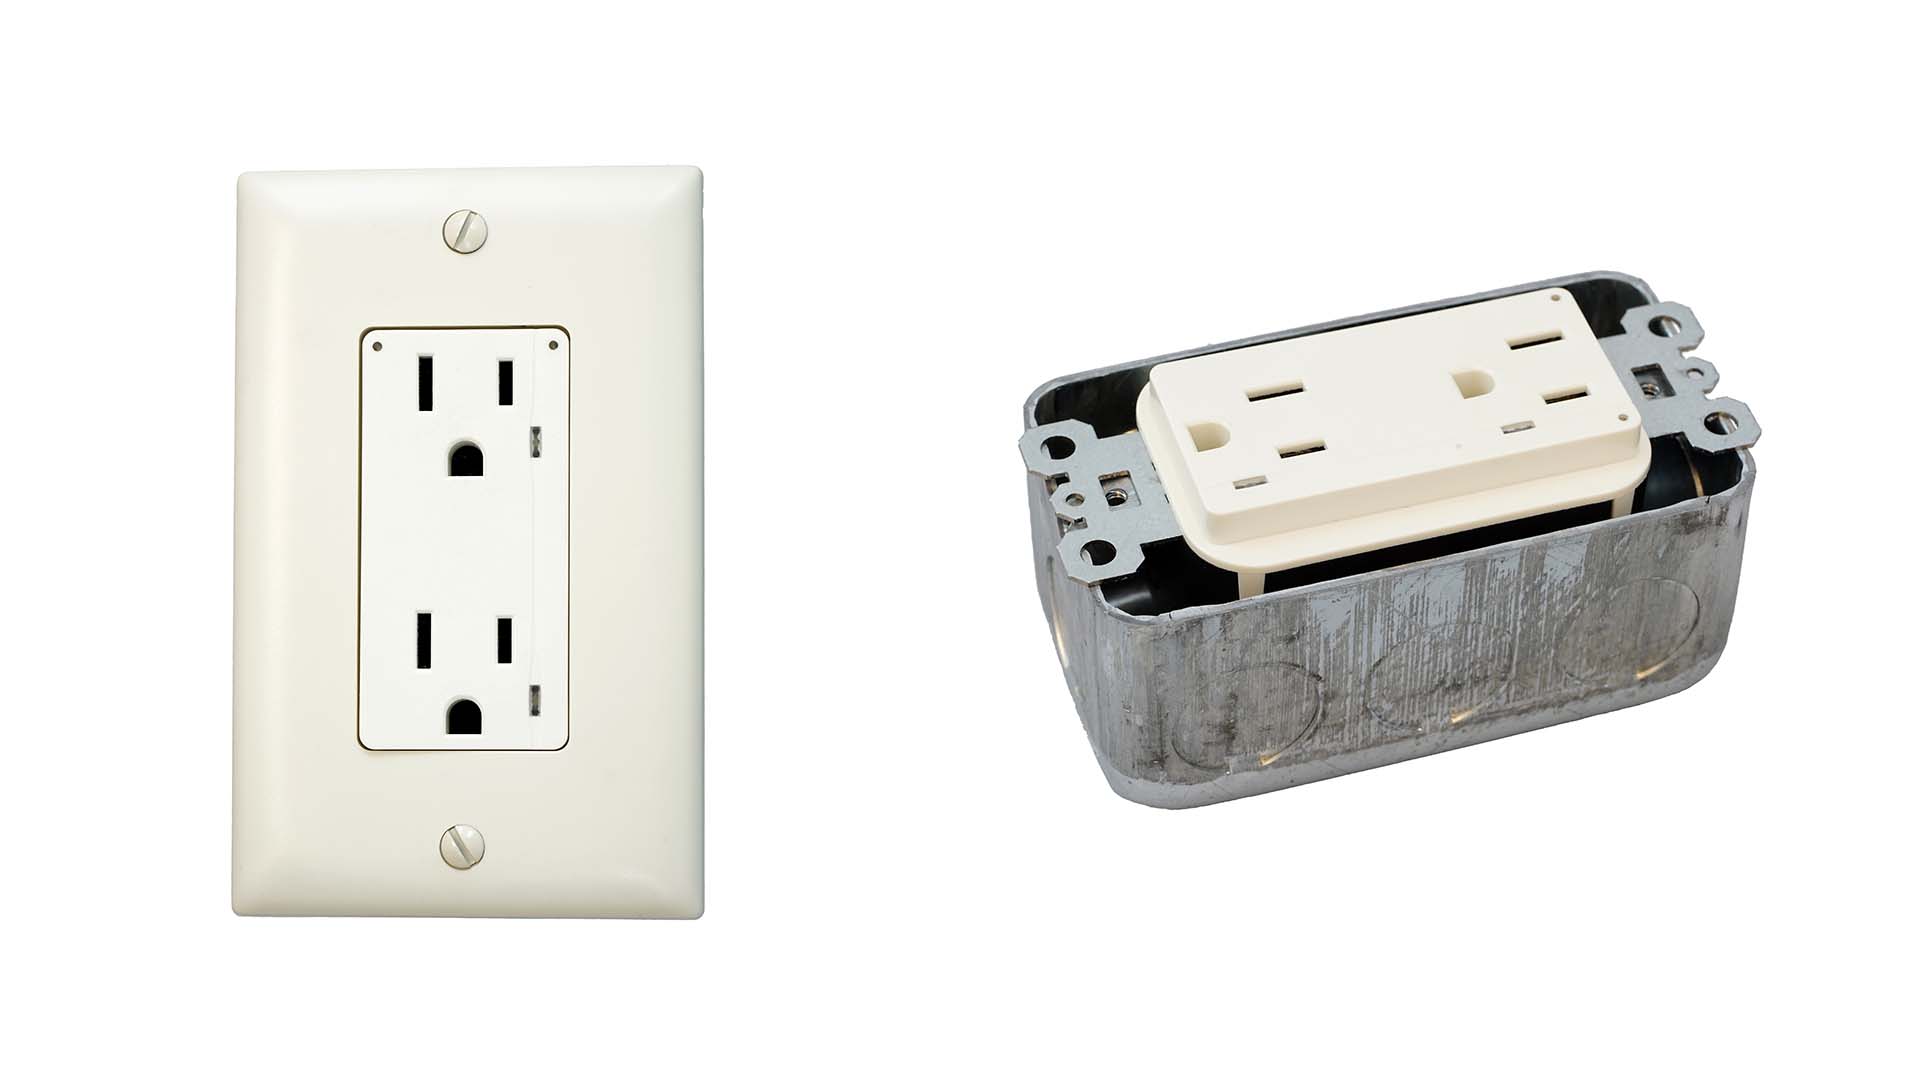 iphone smart wall outlet